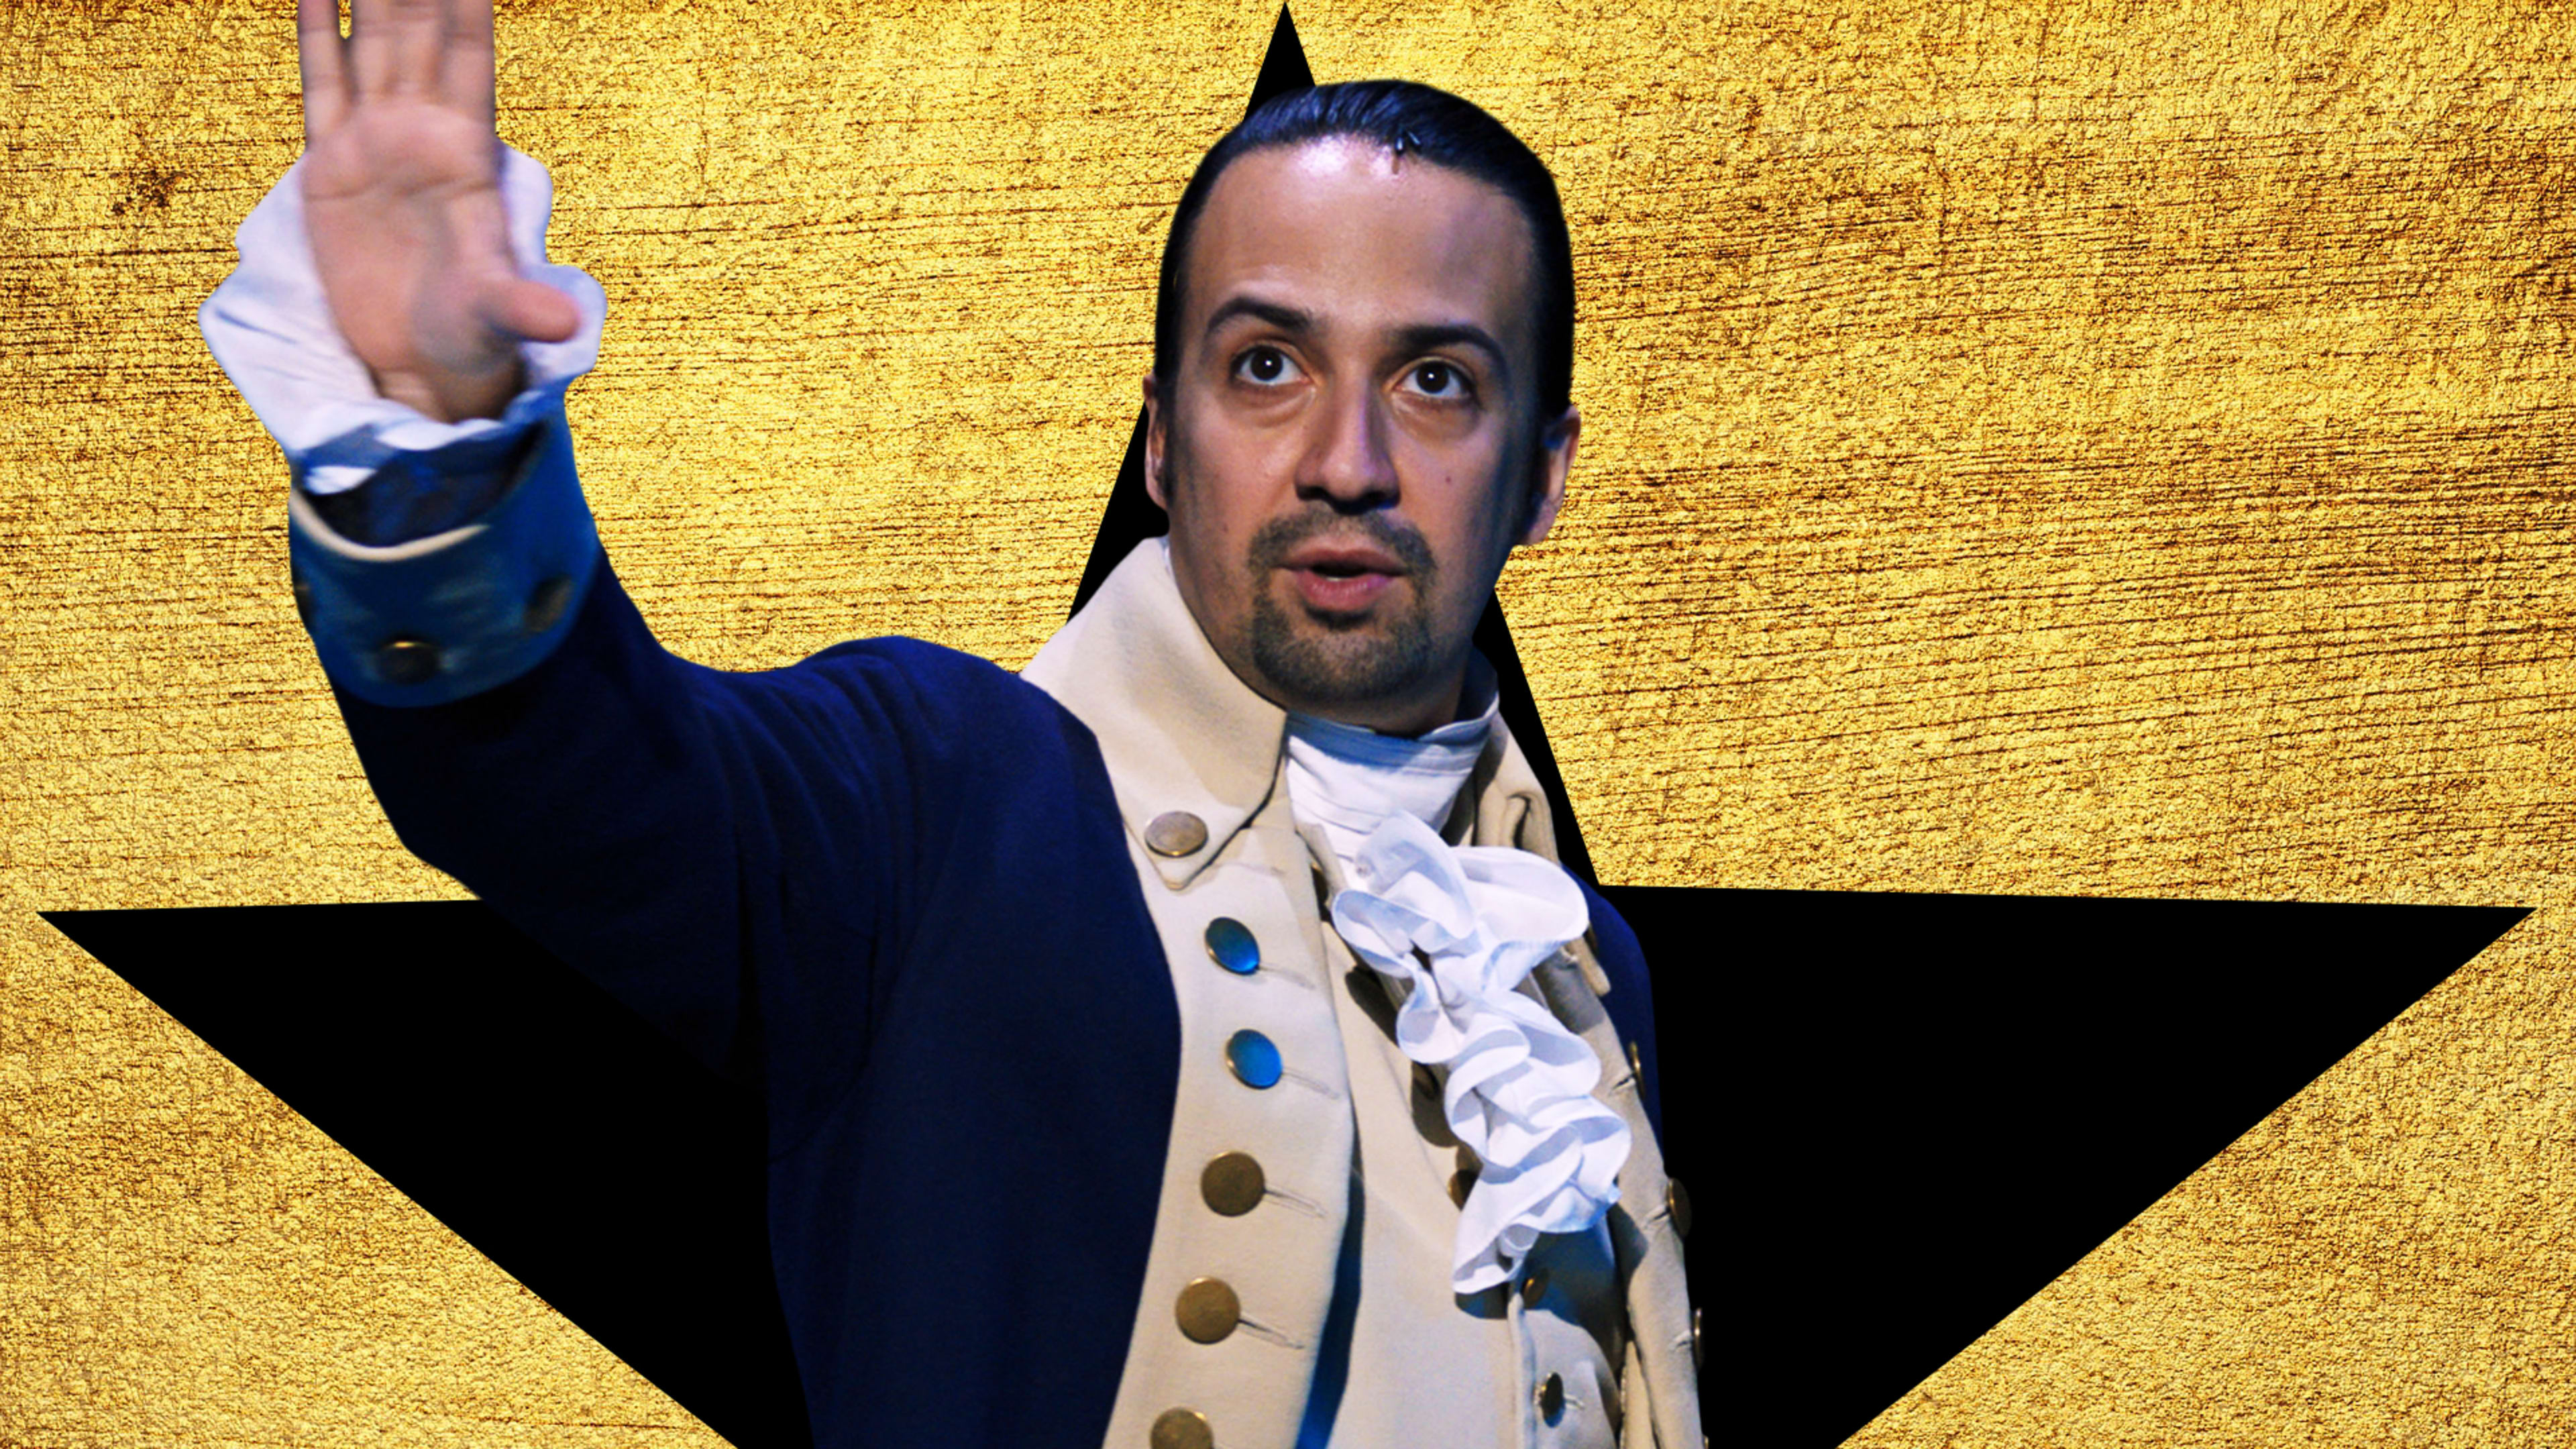 How to watch ‘Hamilton’ for free on Disney Plus: You can’t, and here’s why